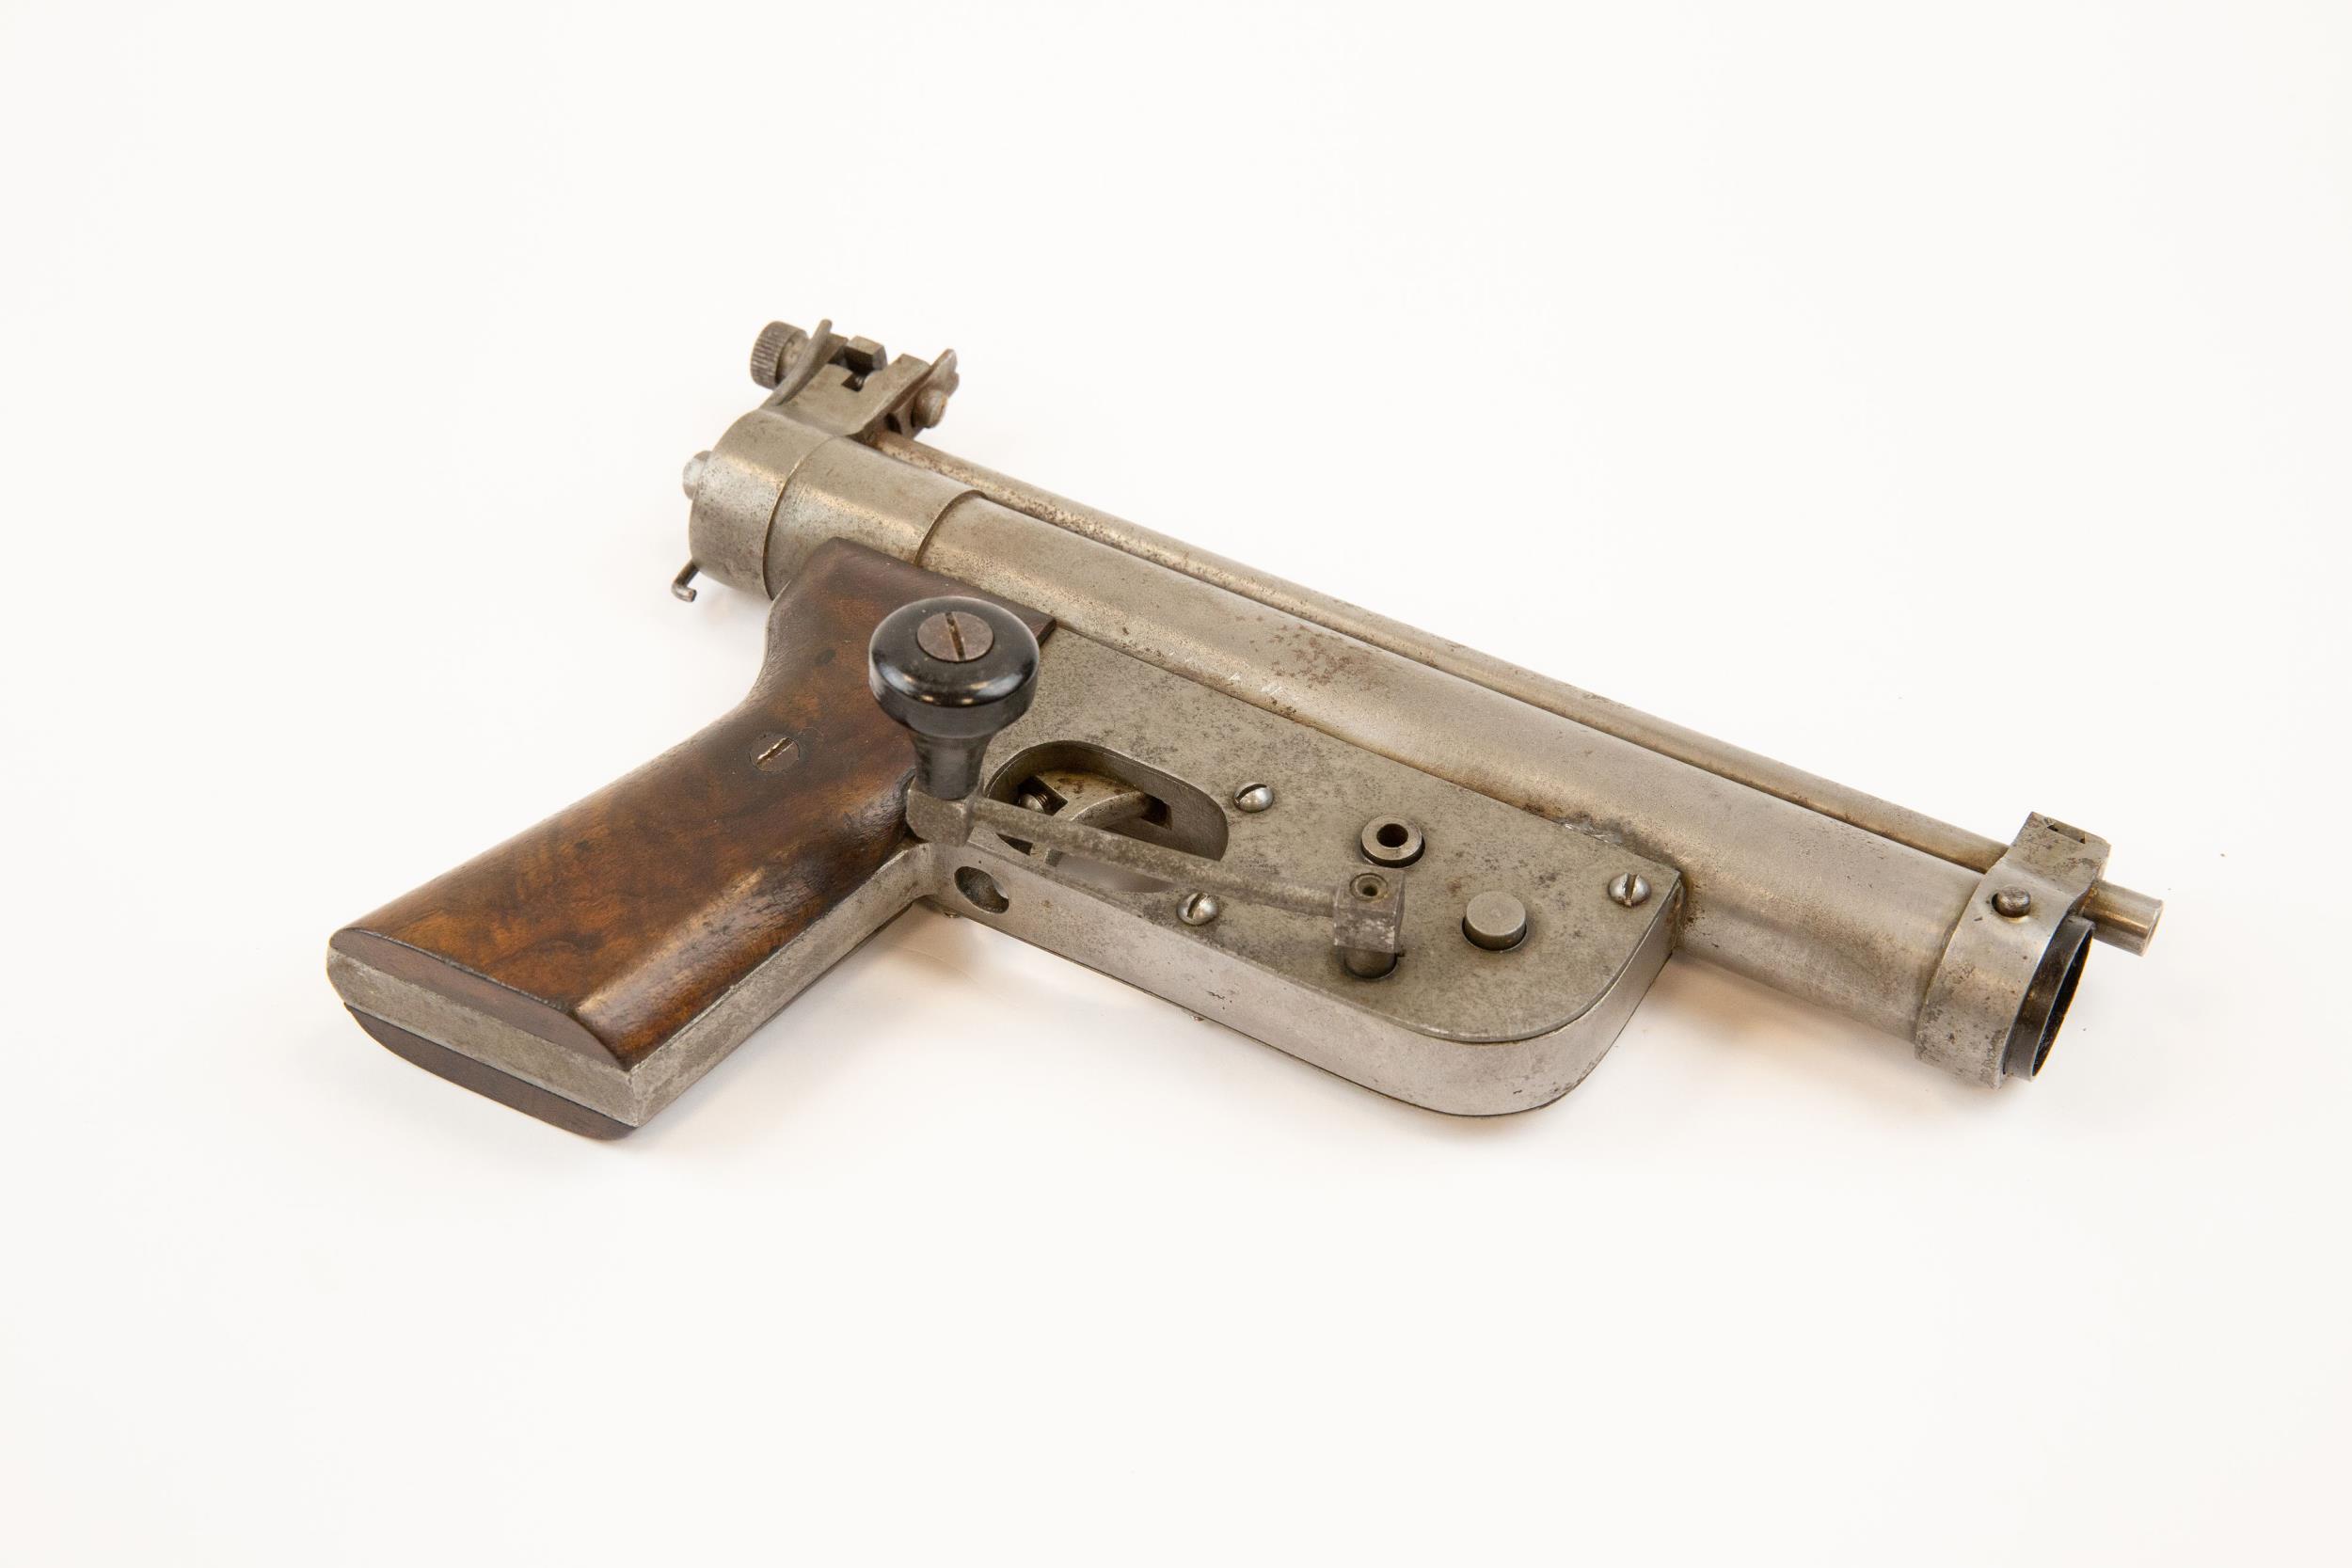 A rare .177" Parker Patent Precision crank wound air pistol, number 262, with plain walnut grips. - Image 3 of 3